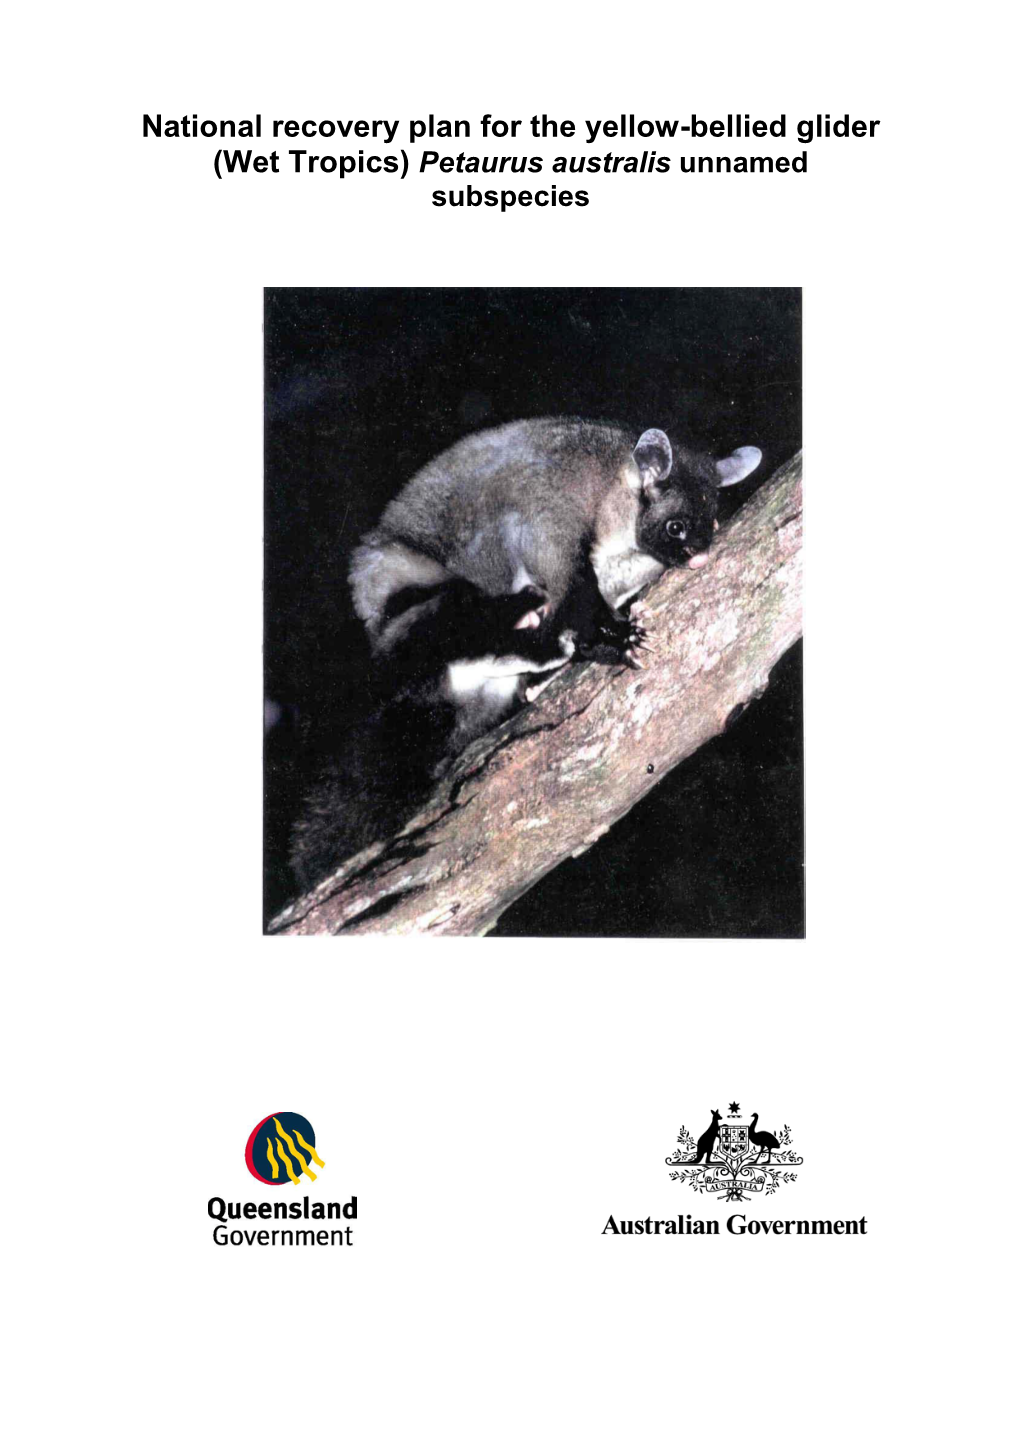 National Recovery Plan for the Yellow-Bellied Glider (Wet Tropics) Petaurus Australis Unnamed Subspecies